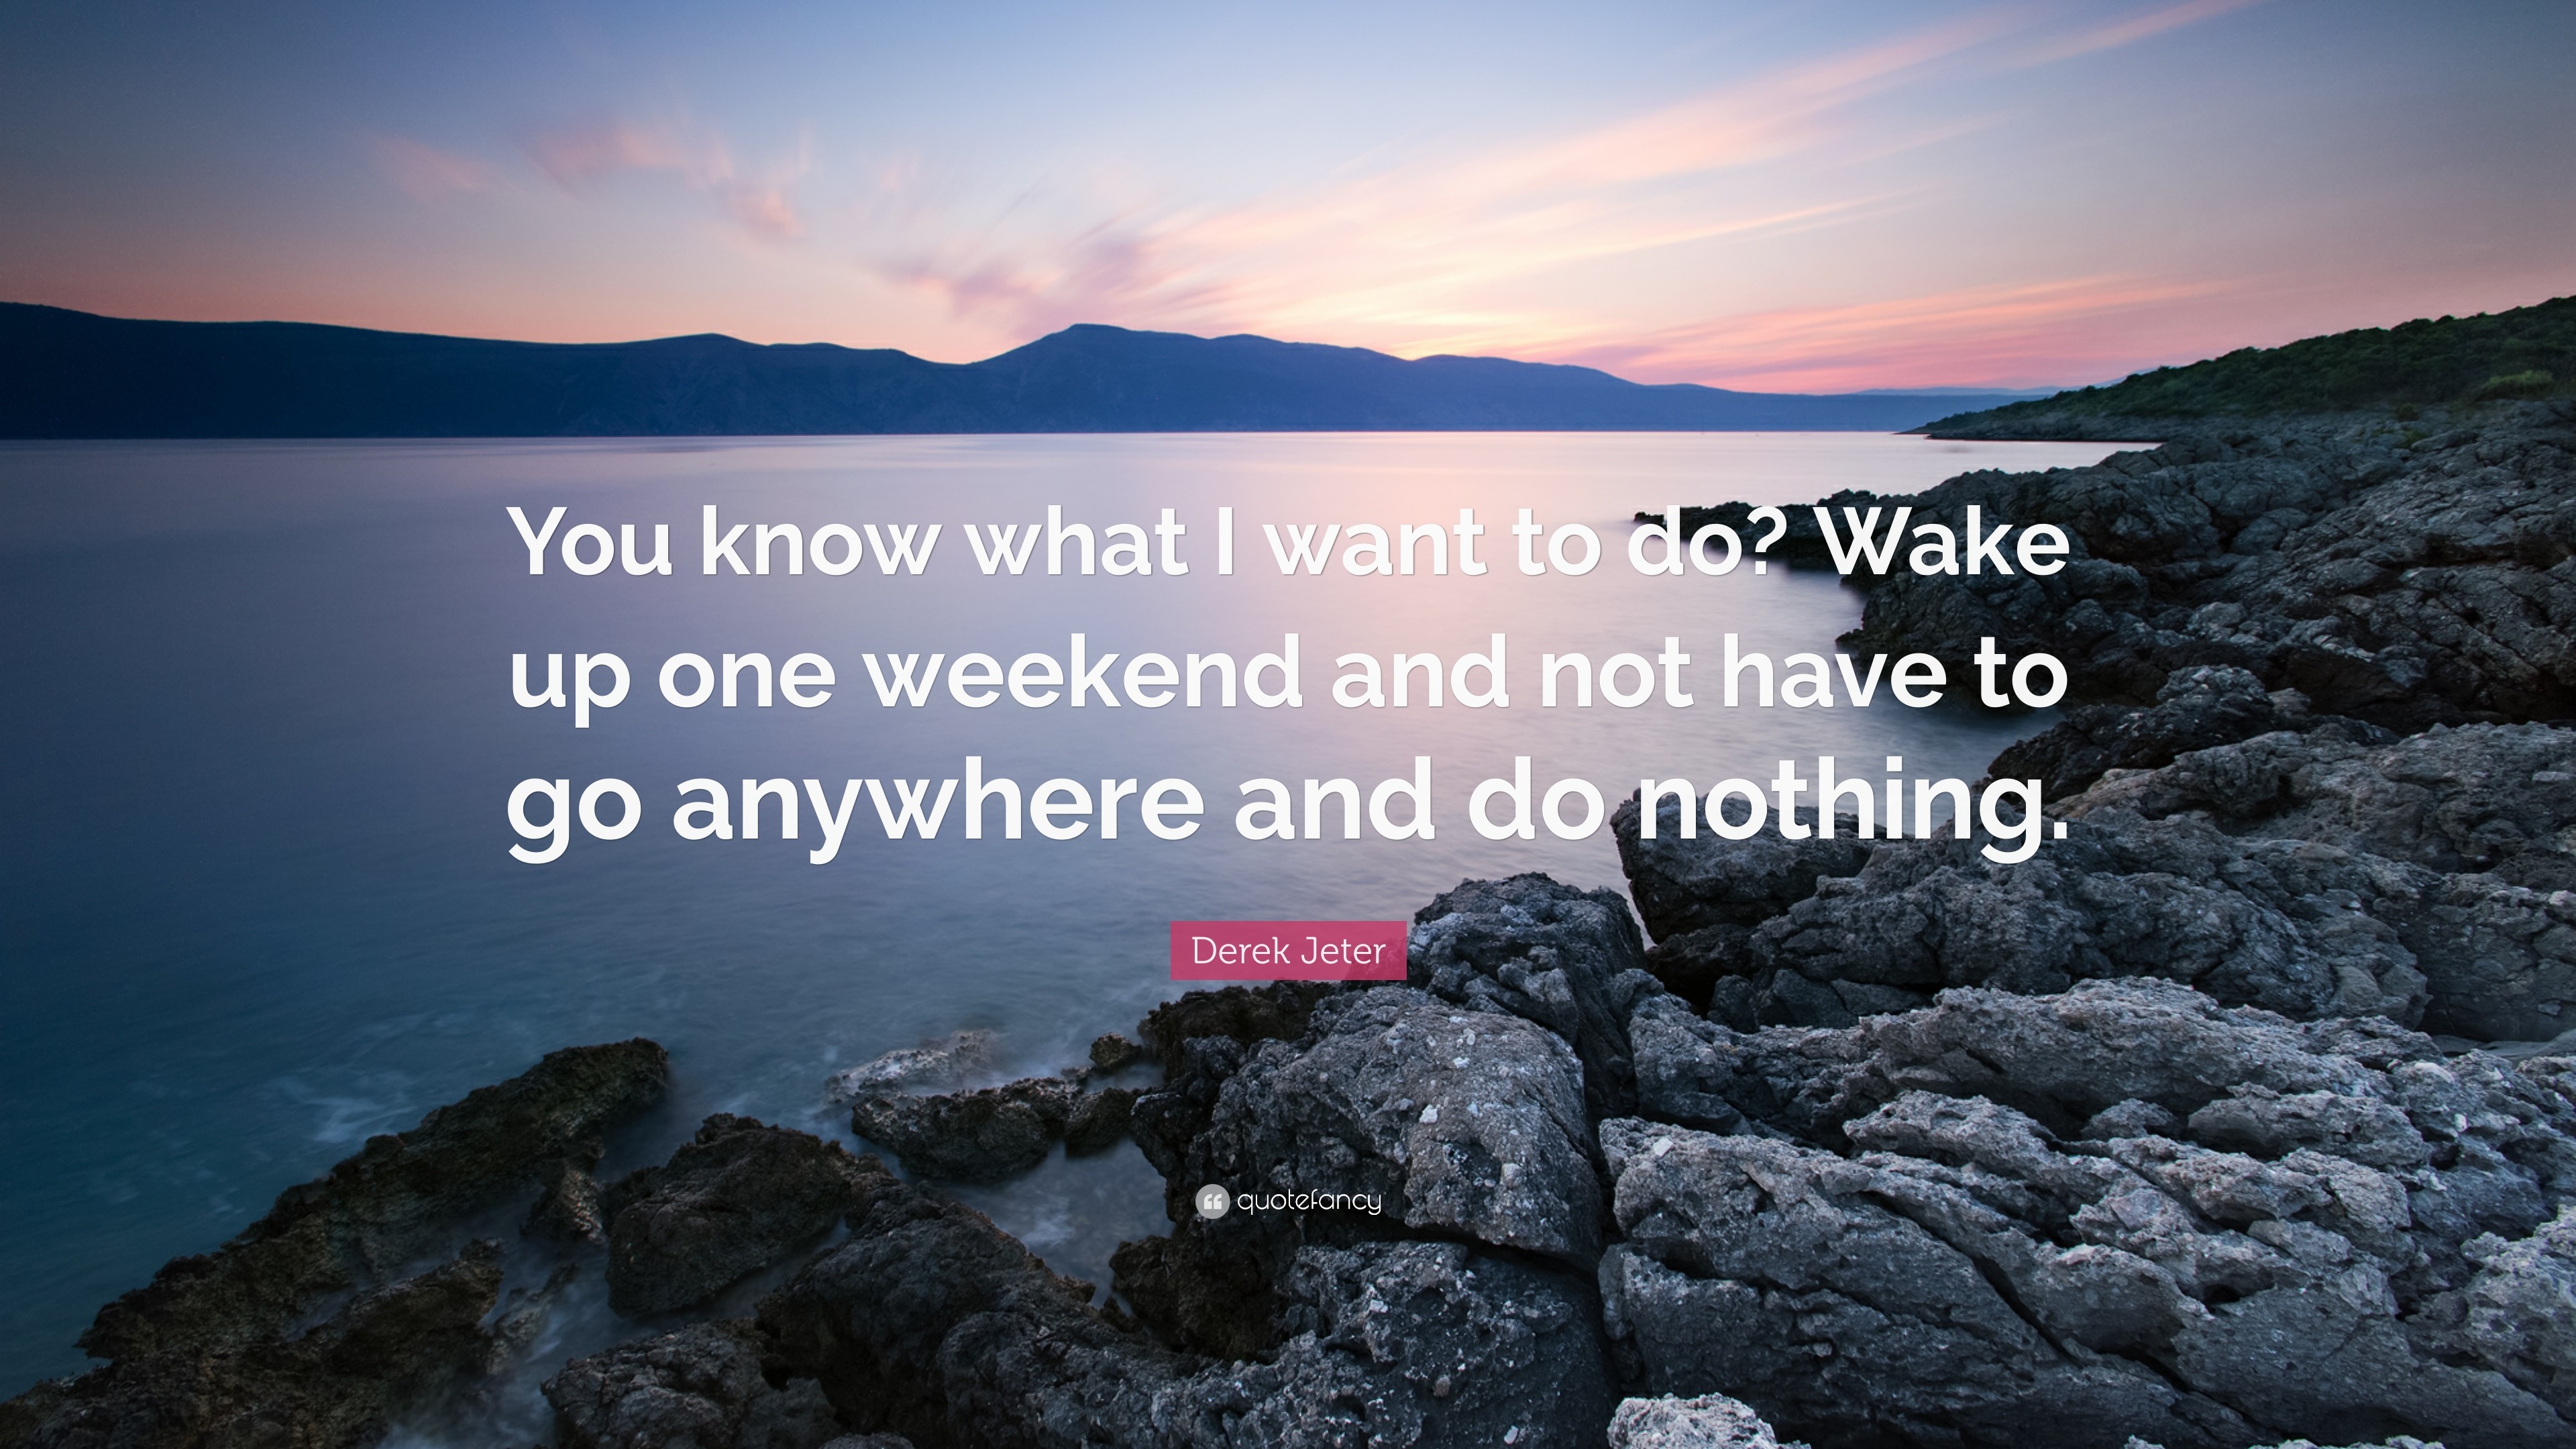 3840x2160 Derek Jeter Quote: “You know what I want to do? Wake up one